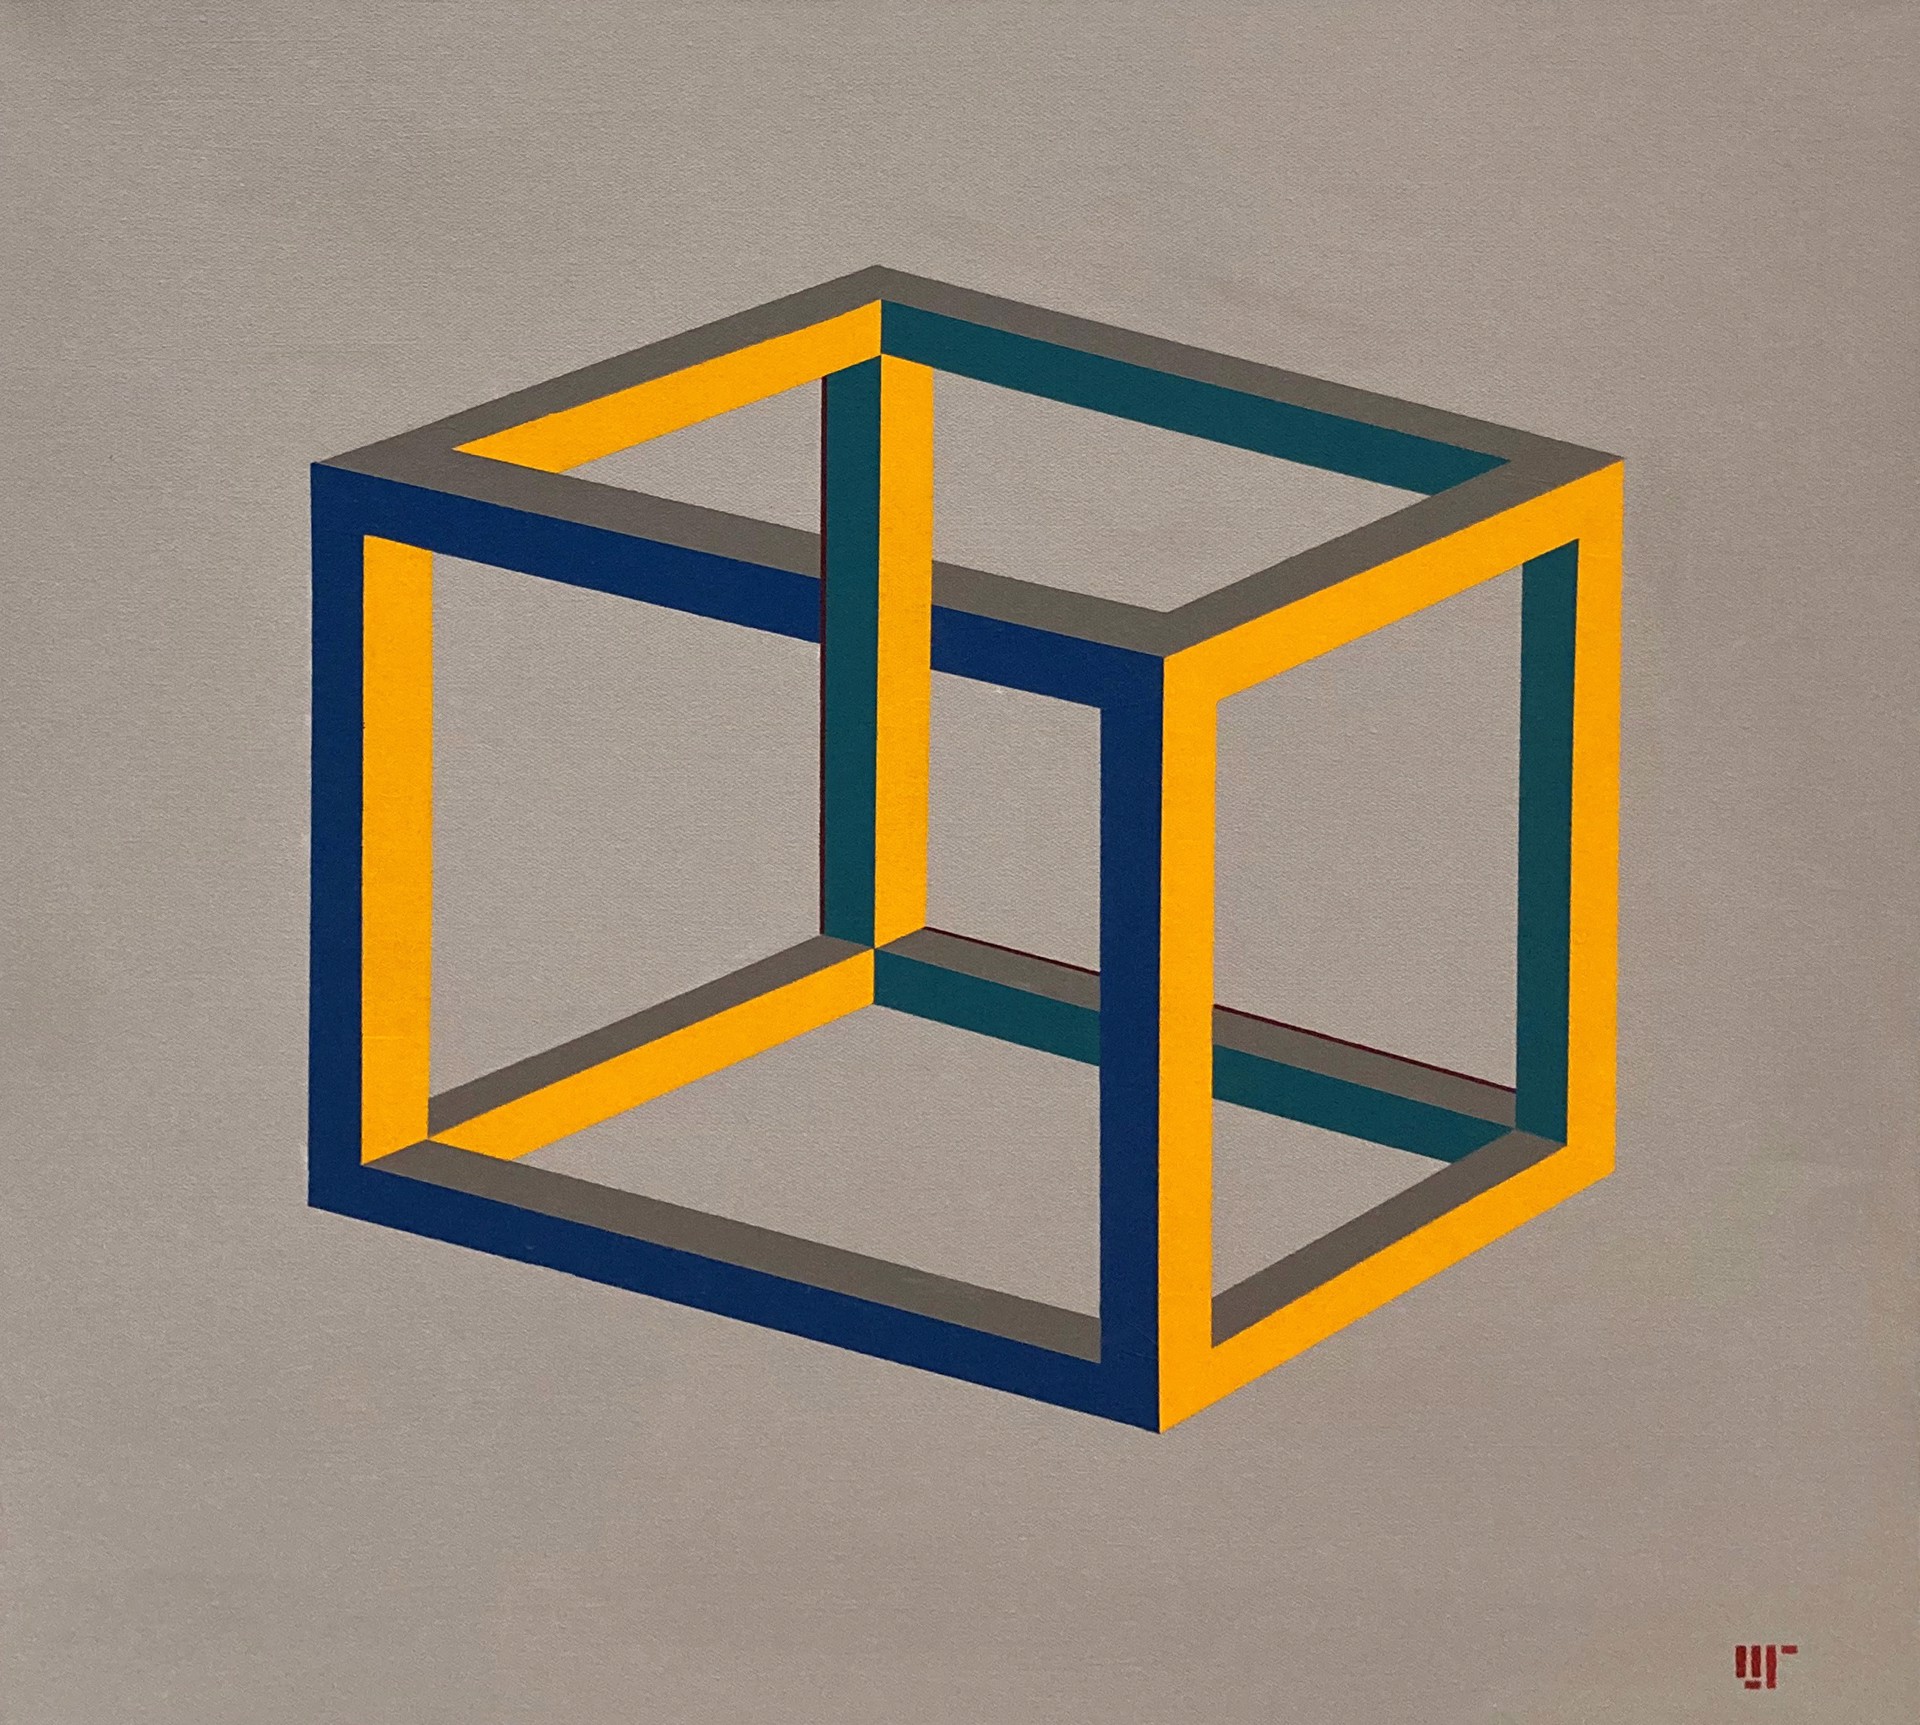 Square 3 by MJ Rigby